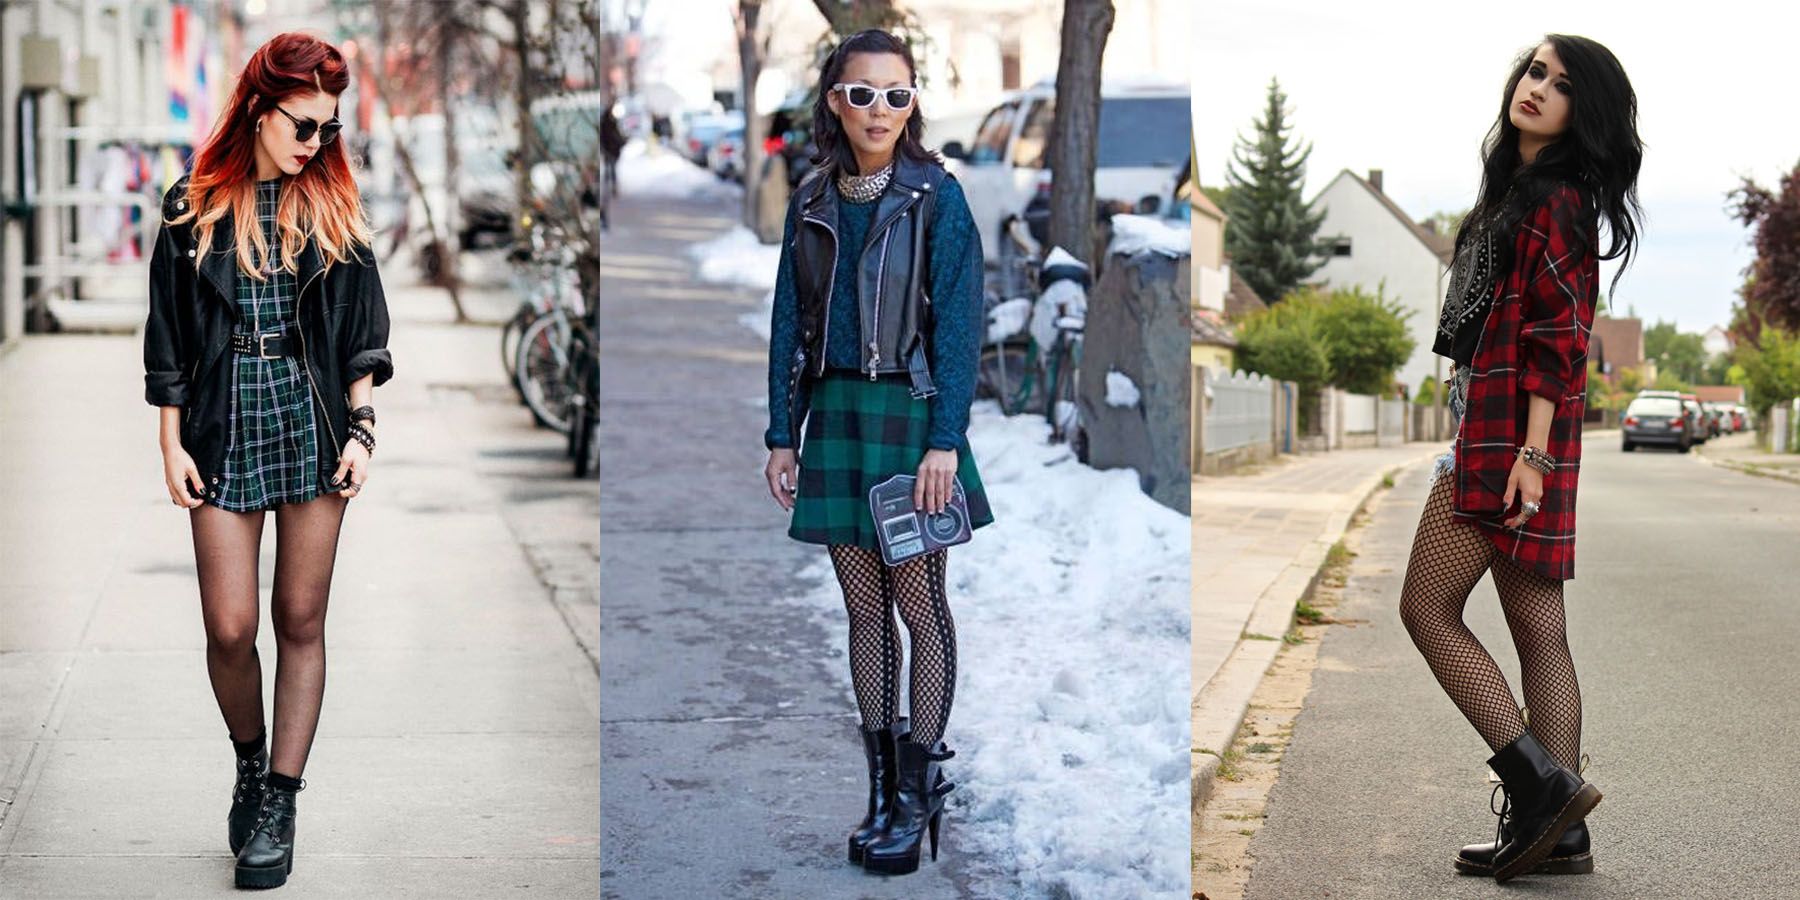 5 Fun Ways to Wear Stockings to Look More Fashionable!